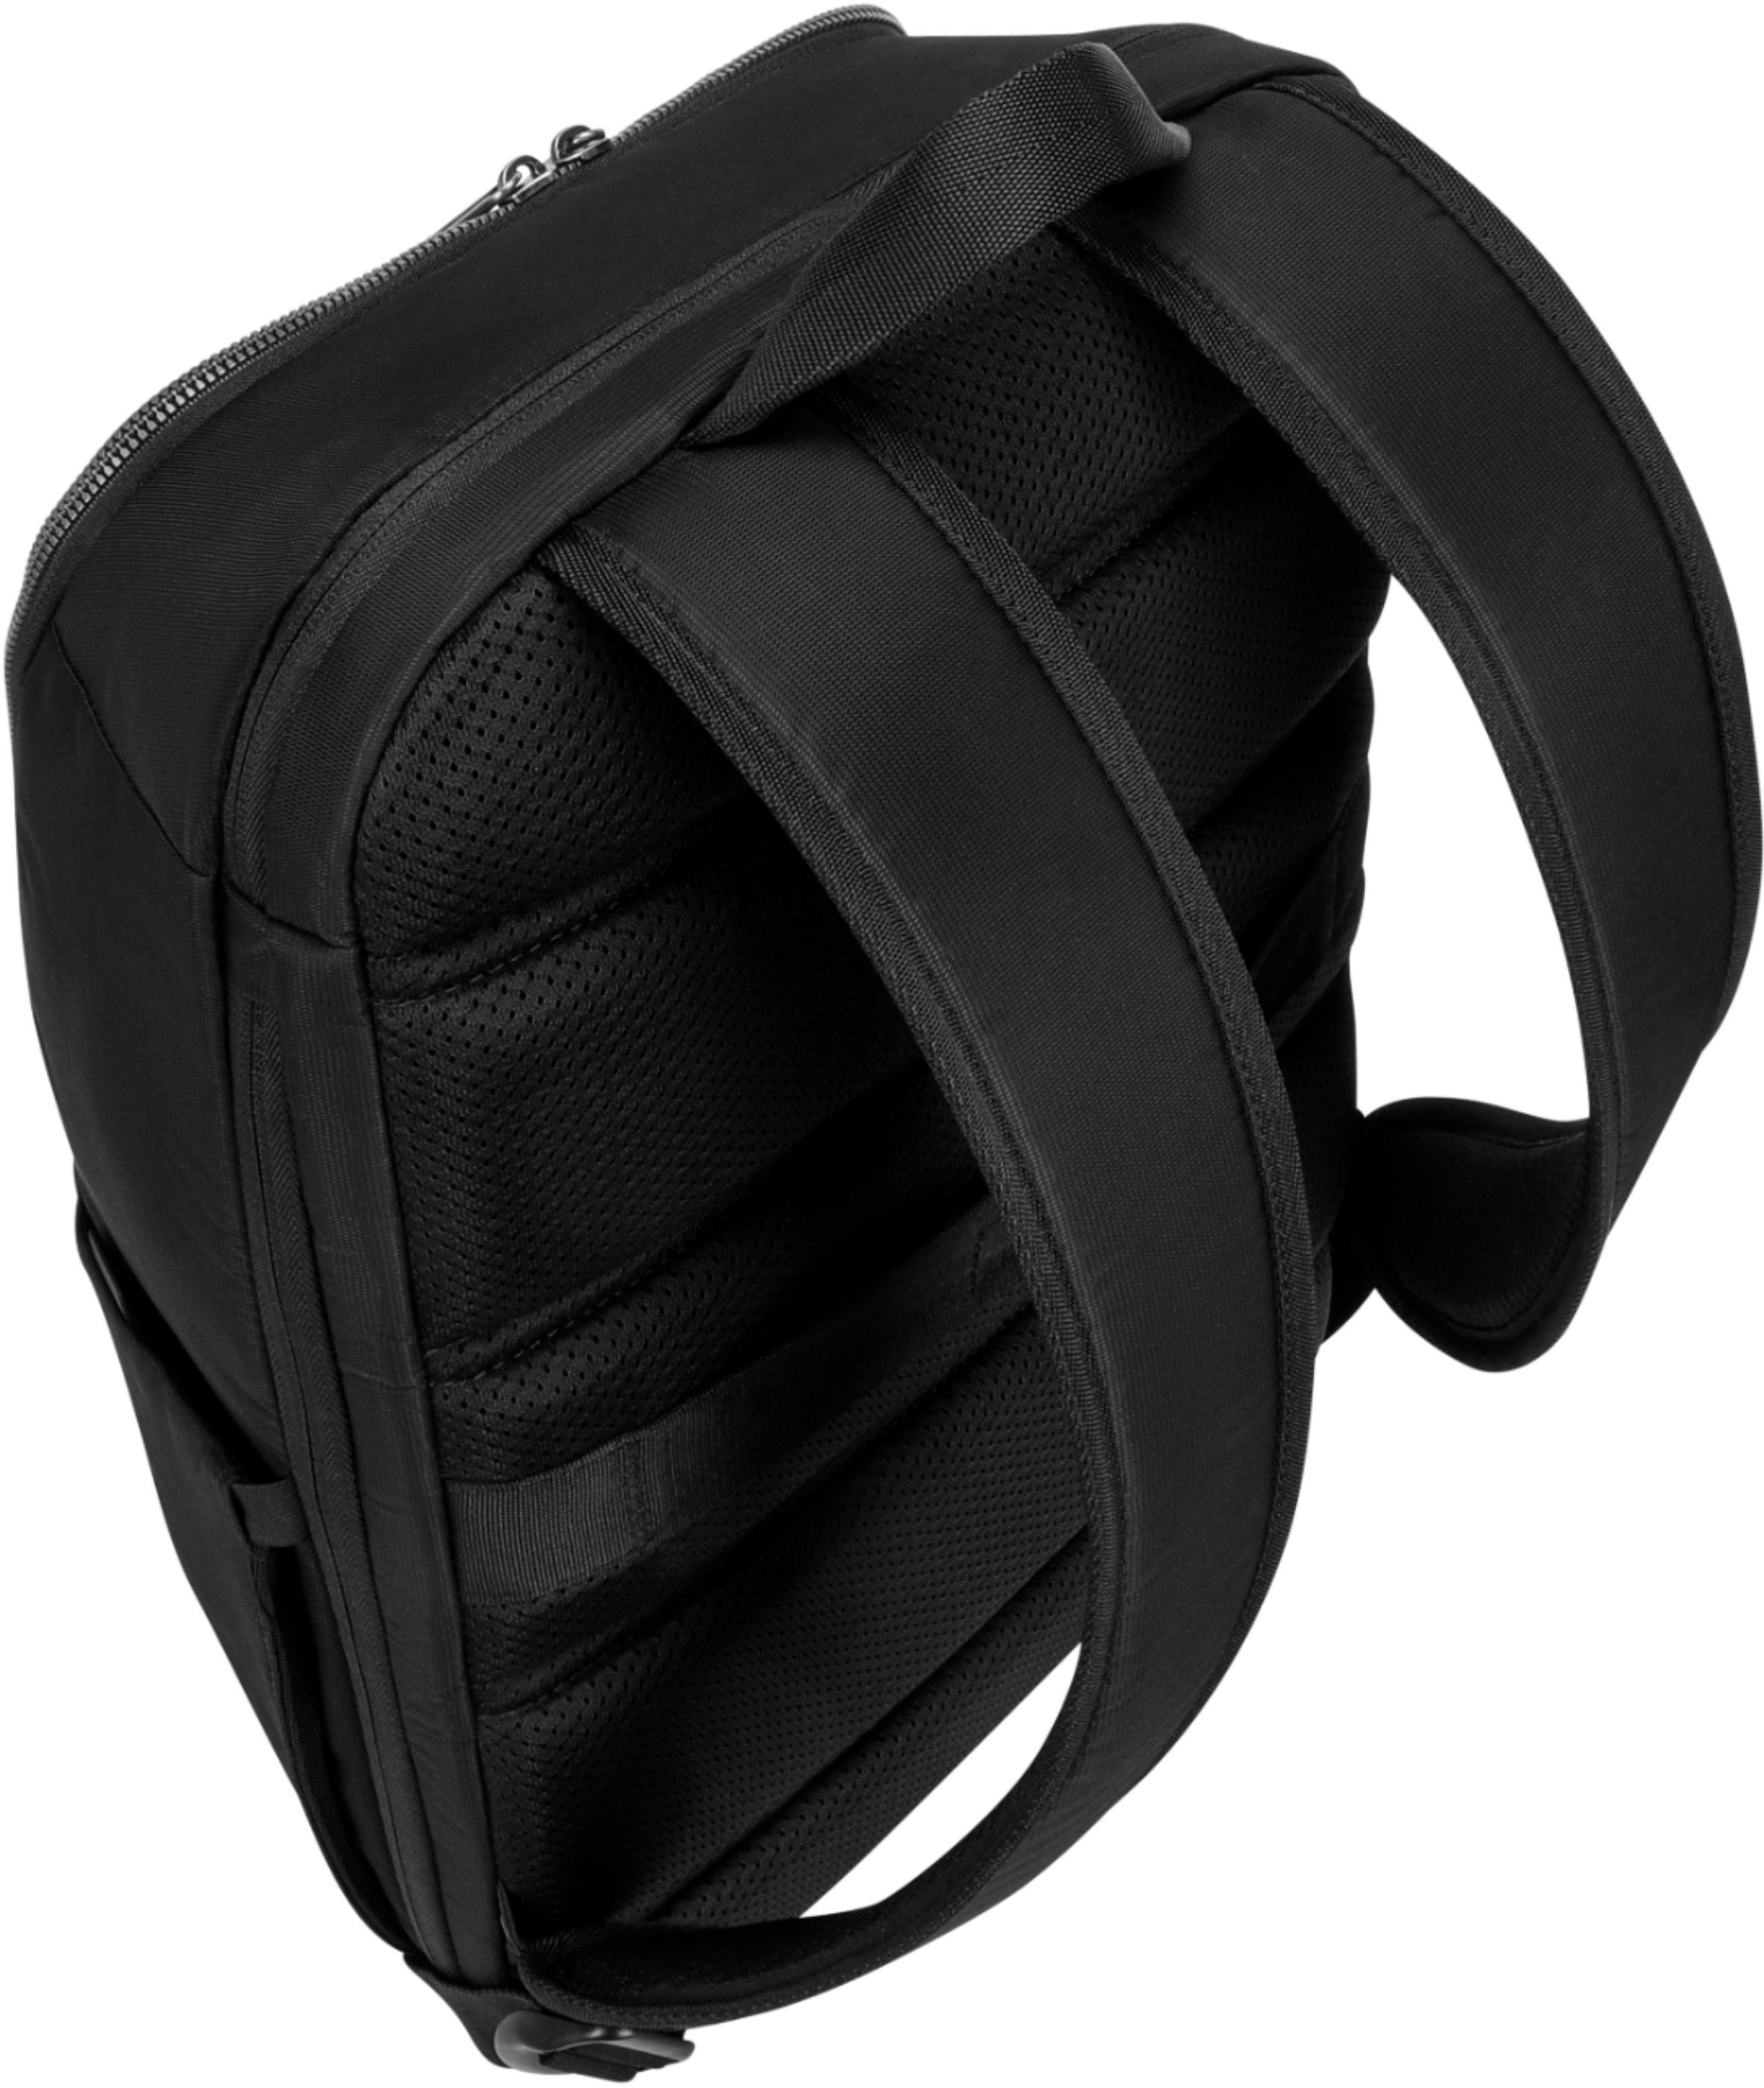 Left View: Swissdigital Design - Terabyte TSA-friendly Backpack with USB Charging port/RFID protection and fits up to 15.6" laptop - Black